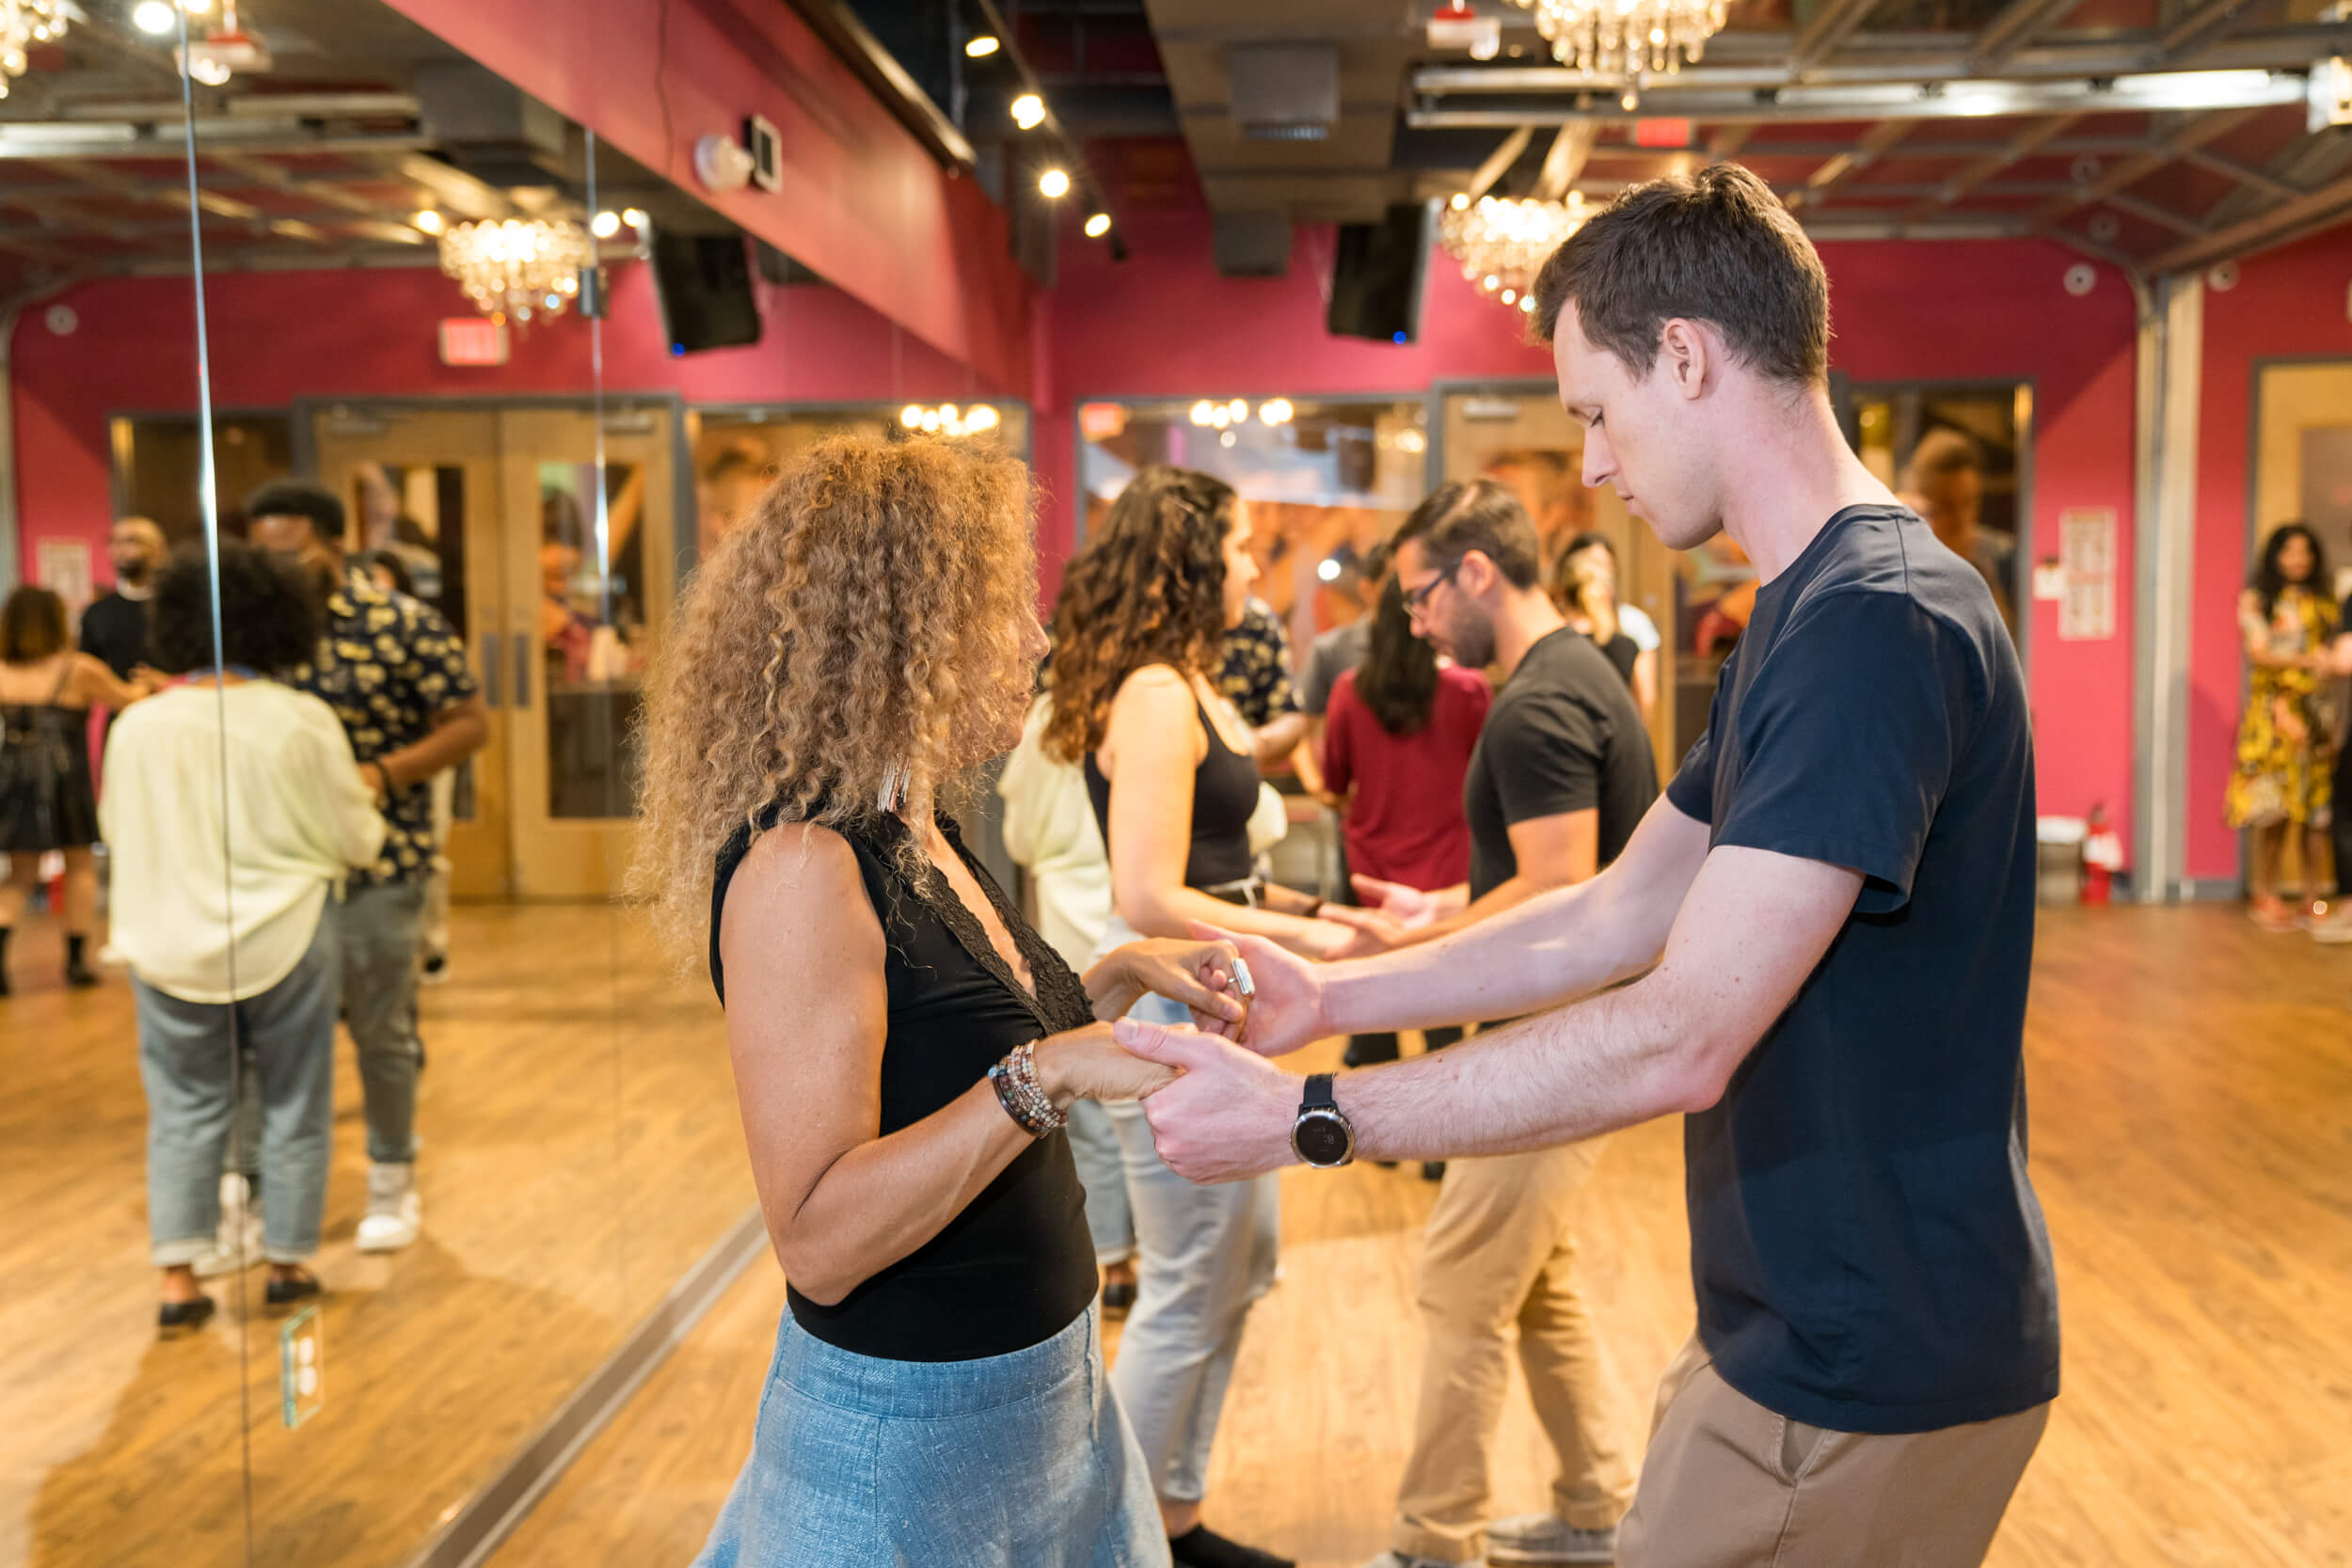 Salsa and Bachata dance classes for adults